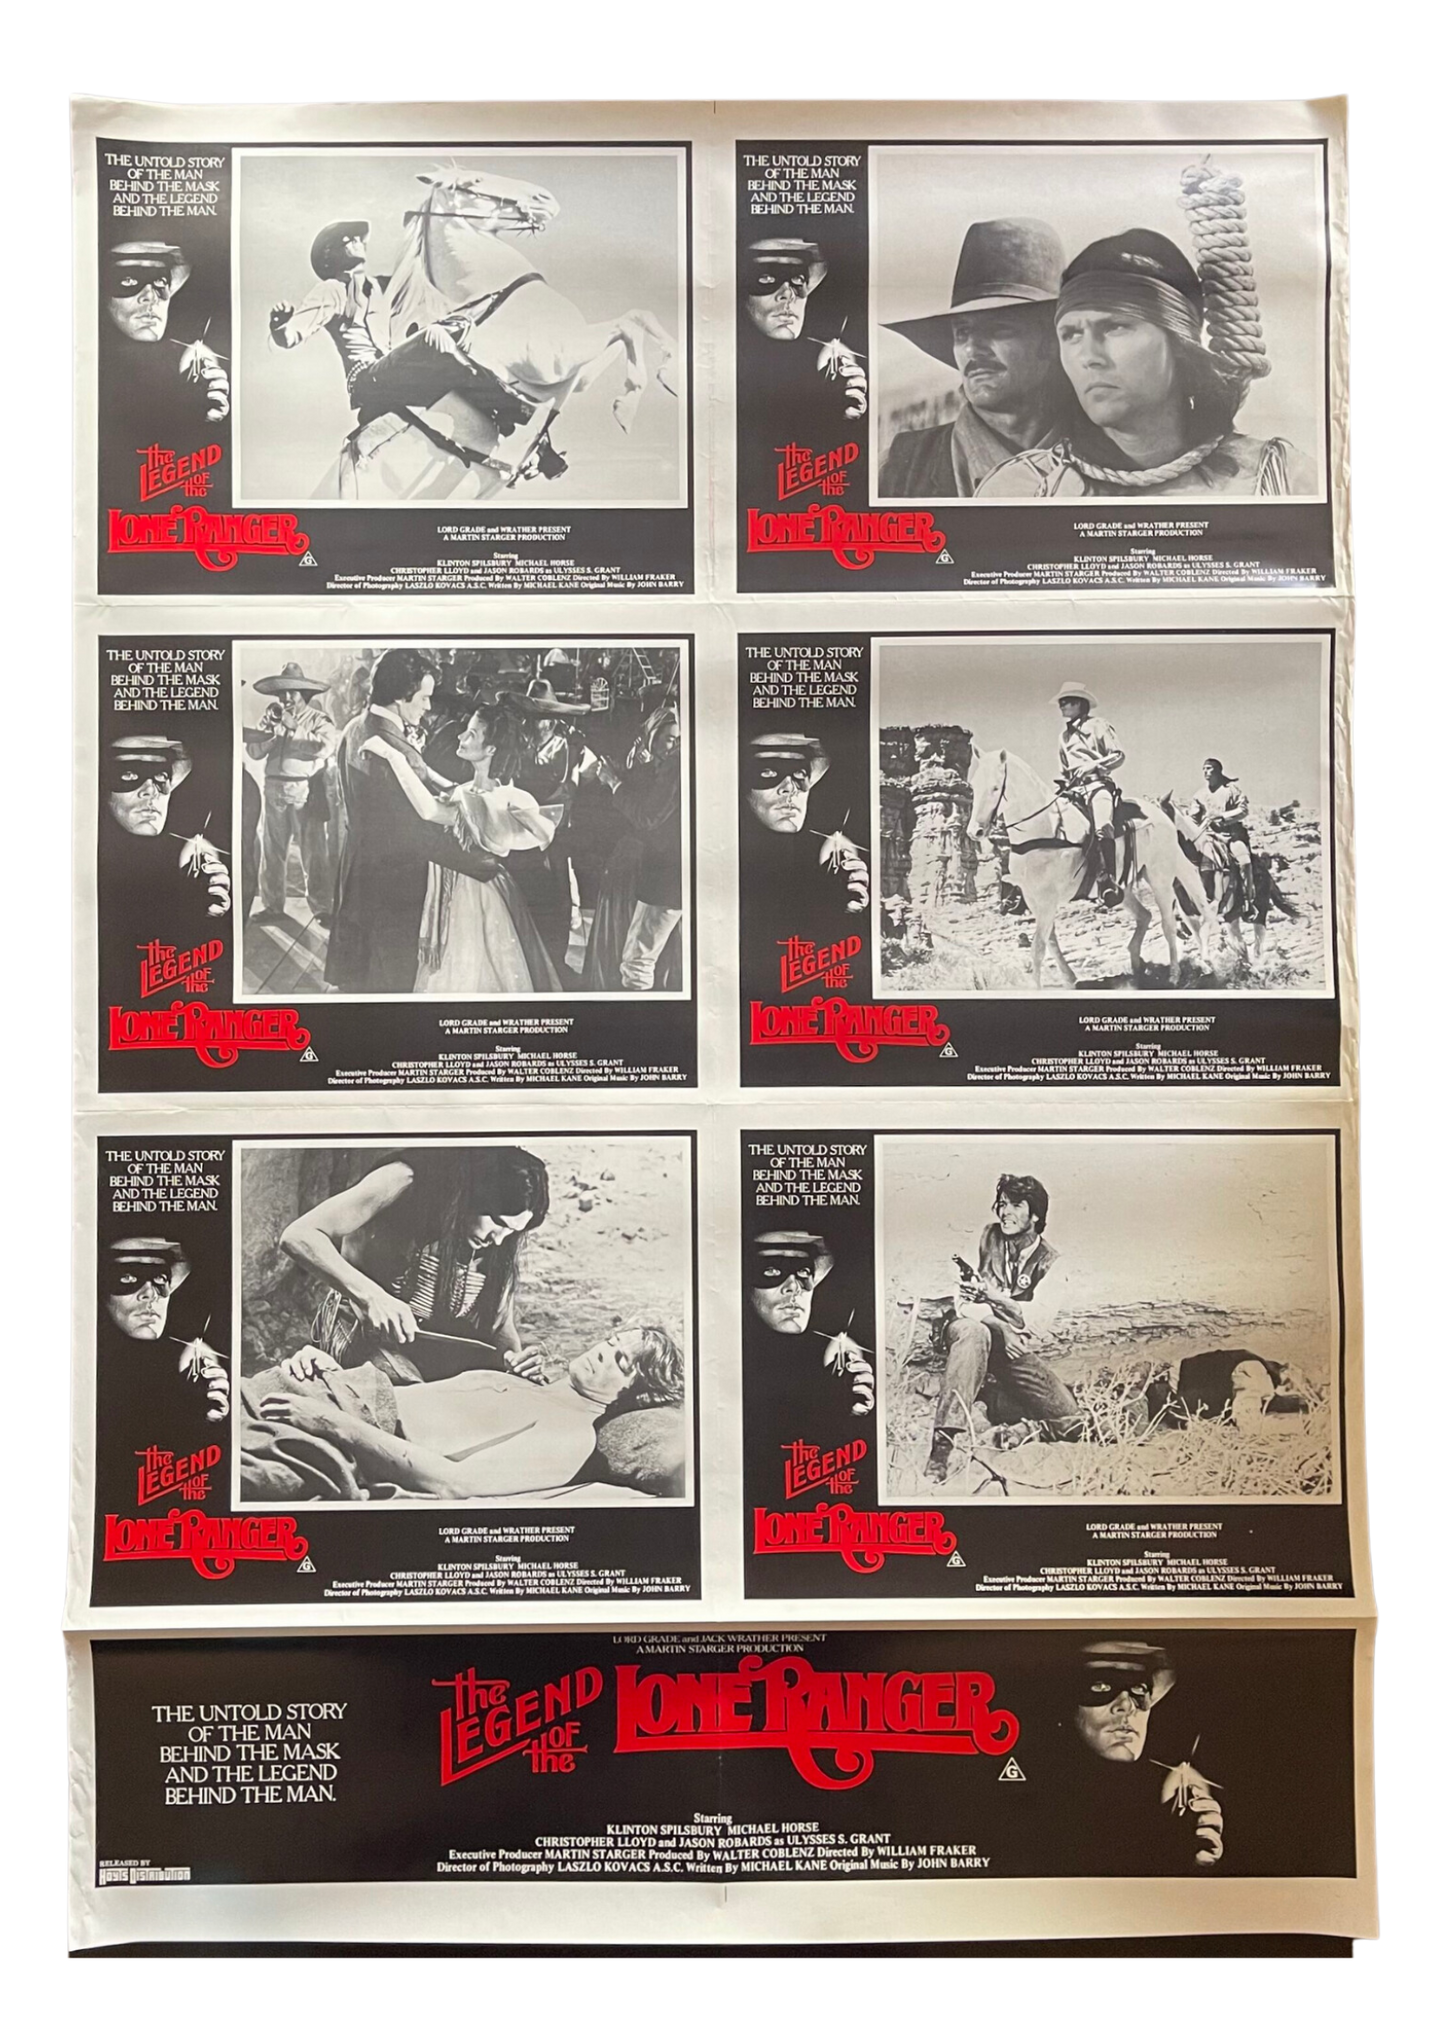 The Legend of the Lone Ranger (1981) - One Sheet